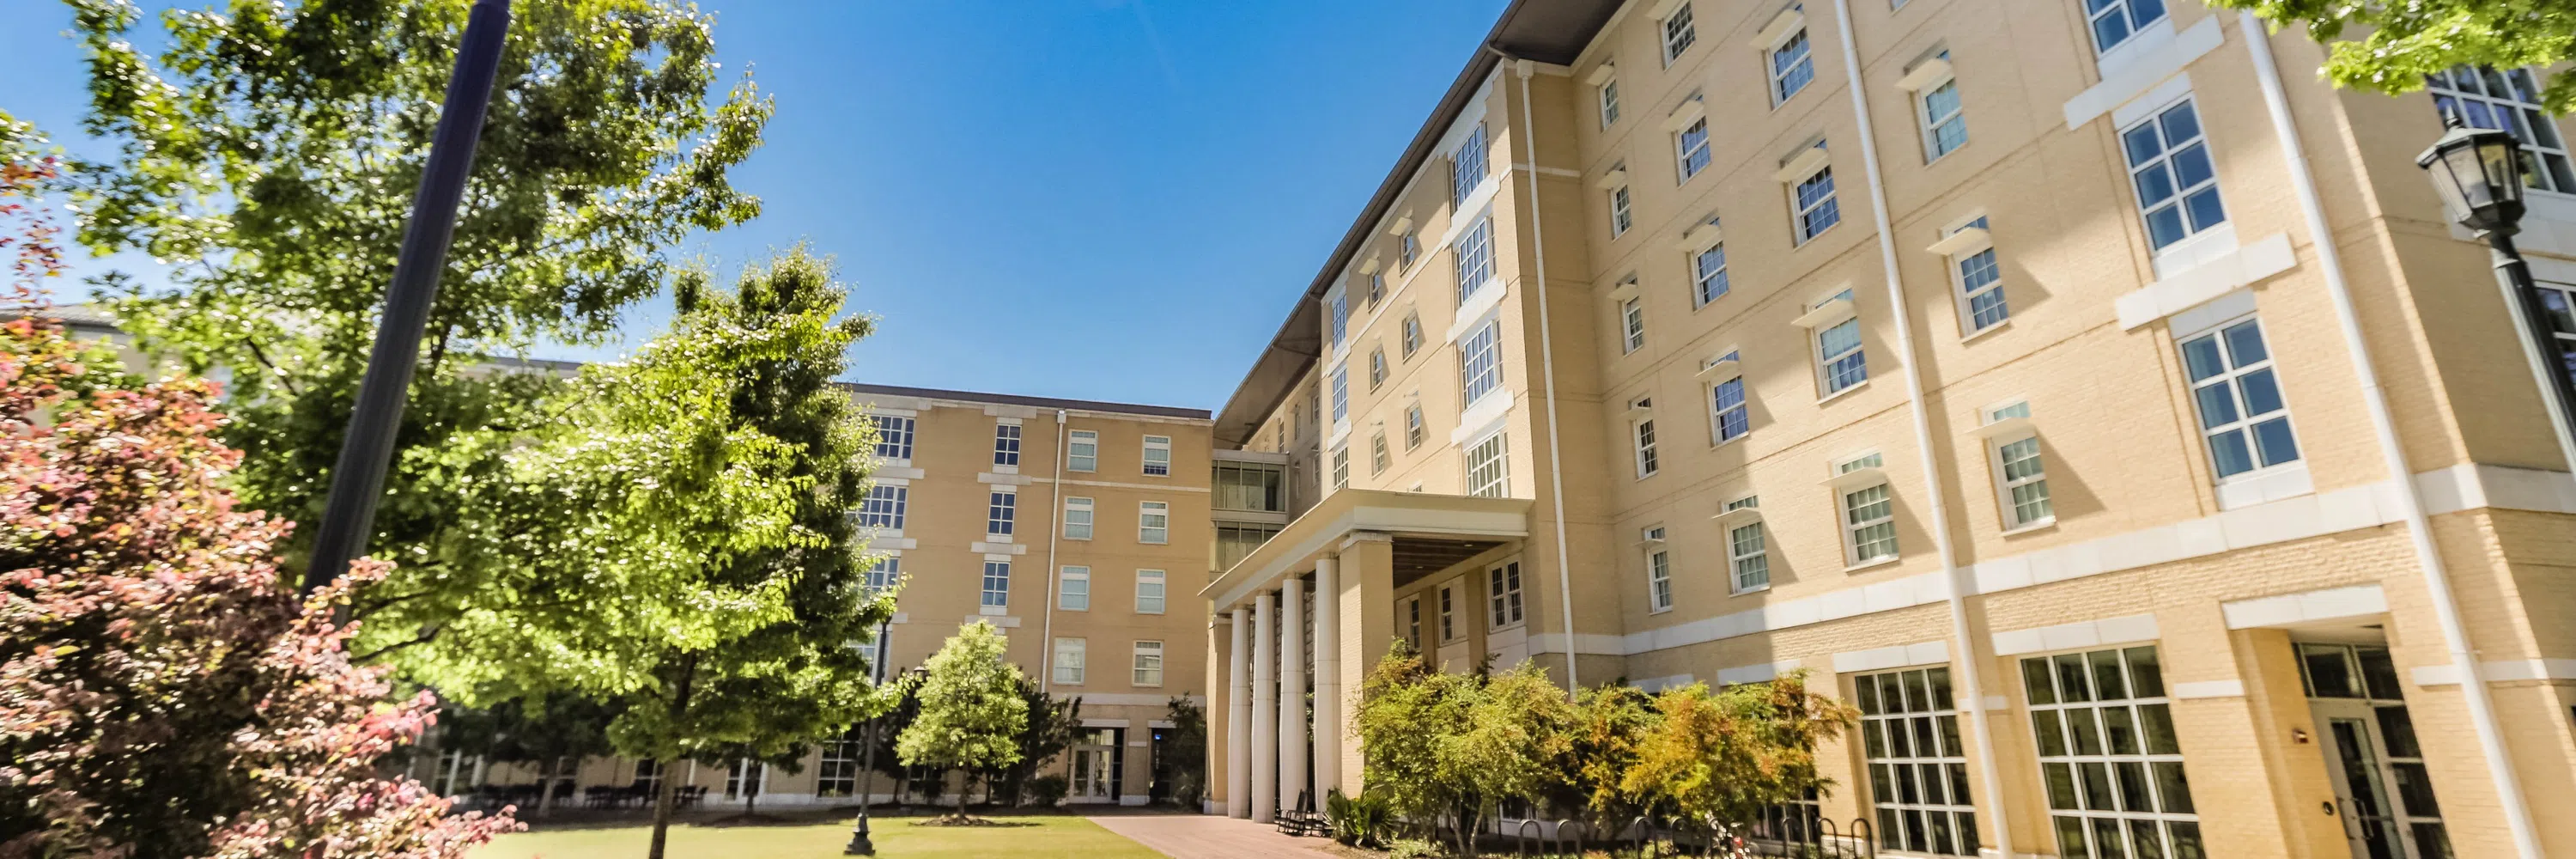 View of the front of the Honors Residence Hall during the day